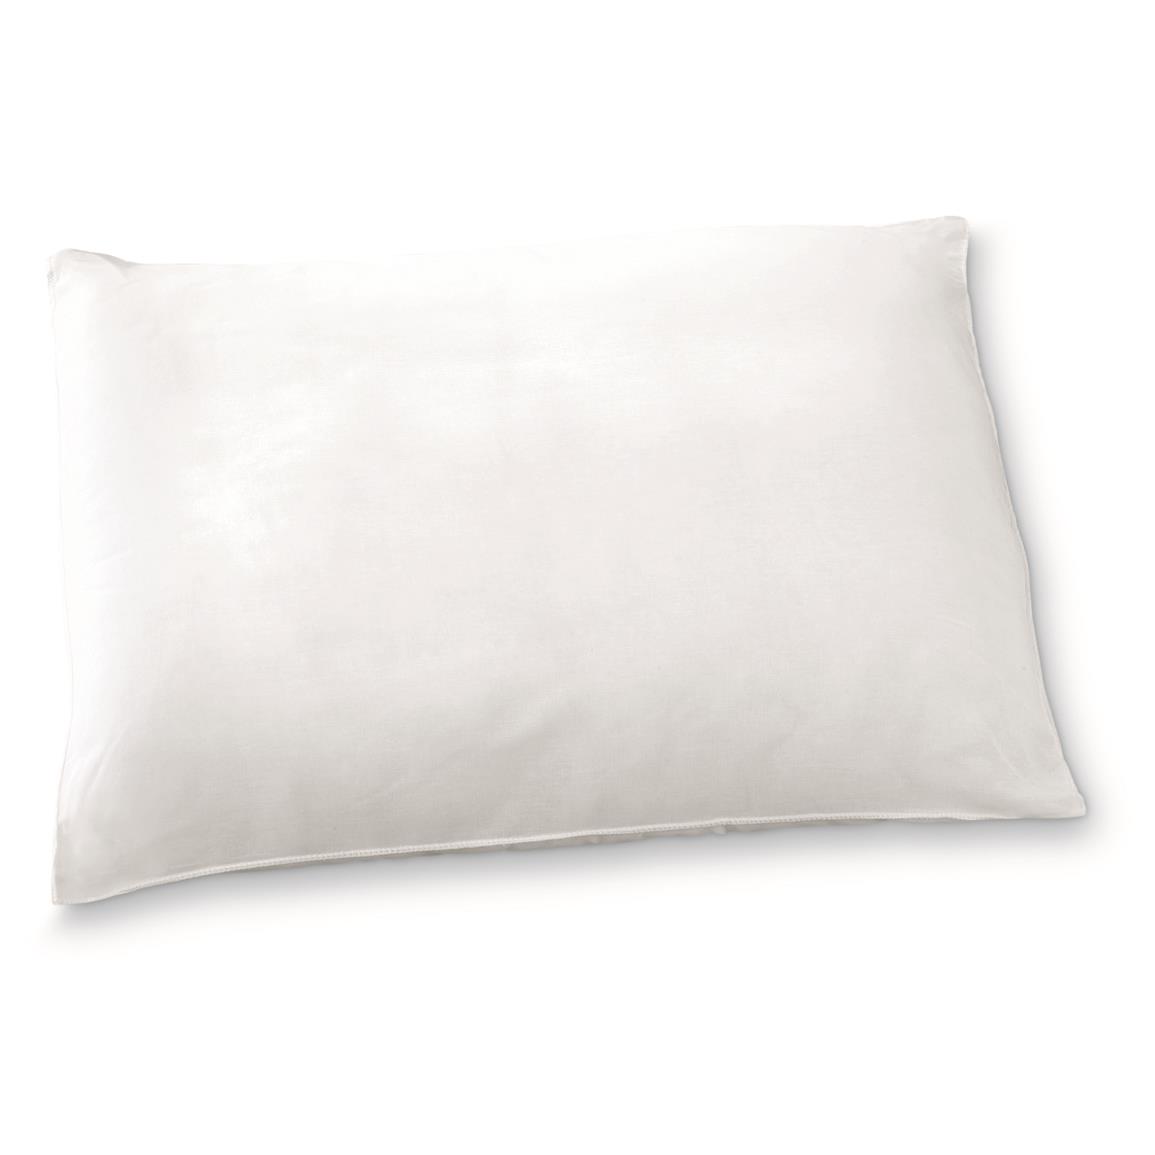 U.S. Military Surplus Polyester Fiber Pillows, 8 Pack, New